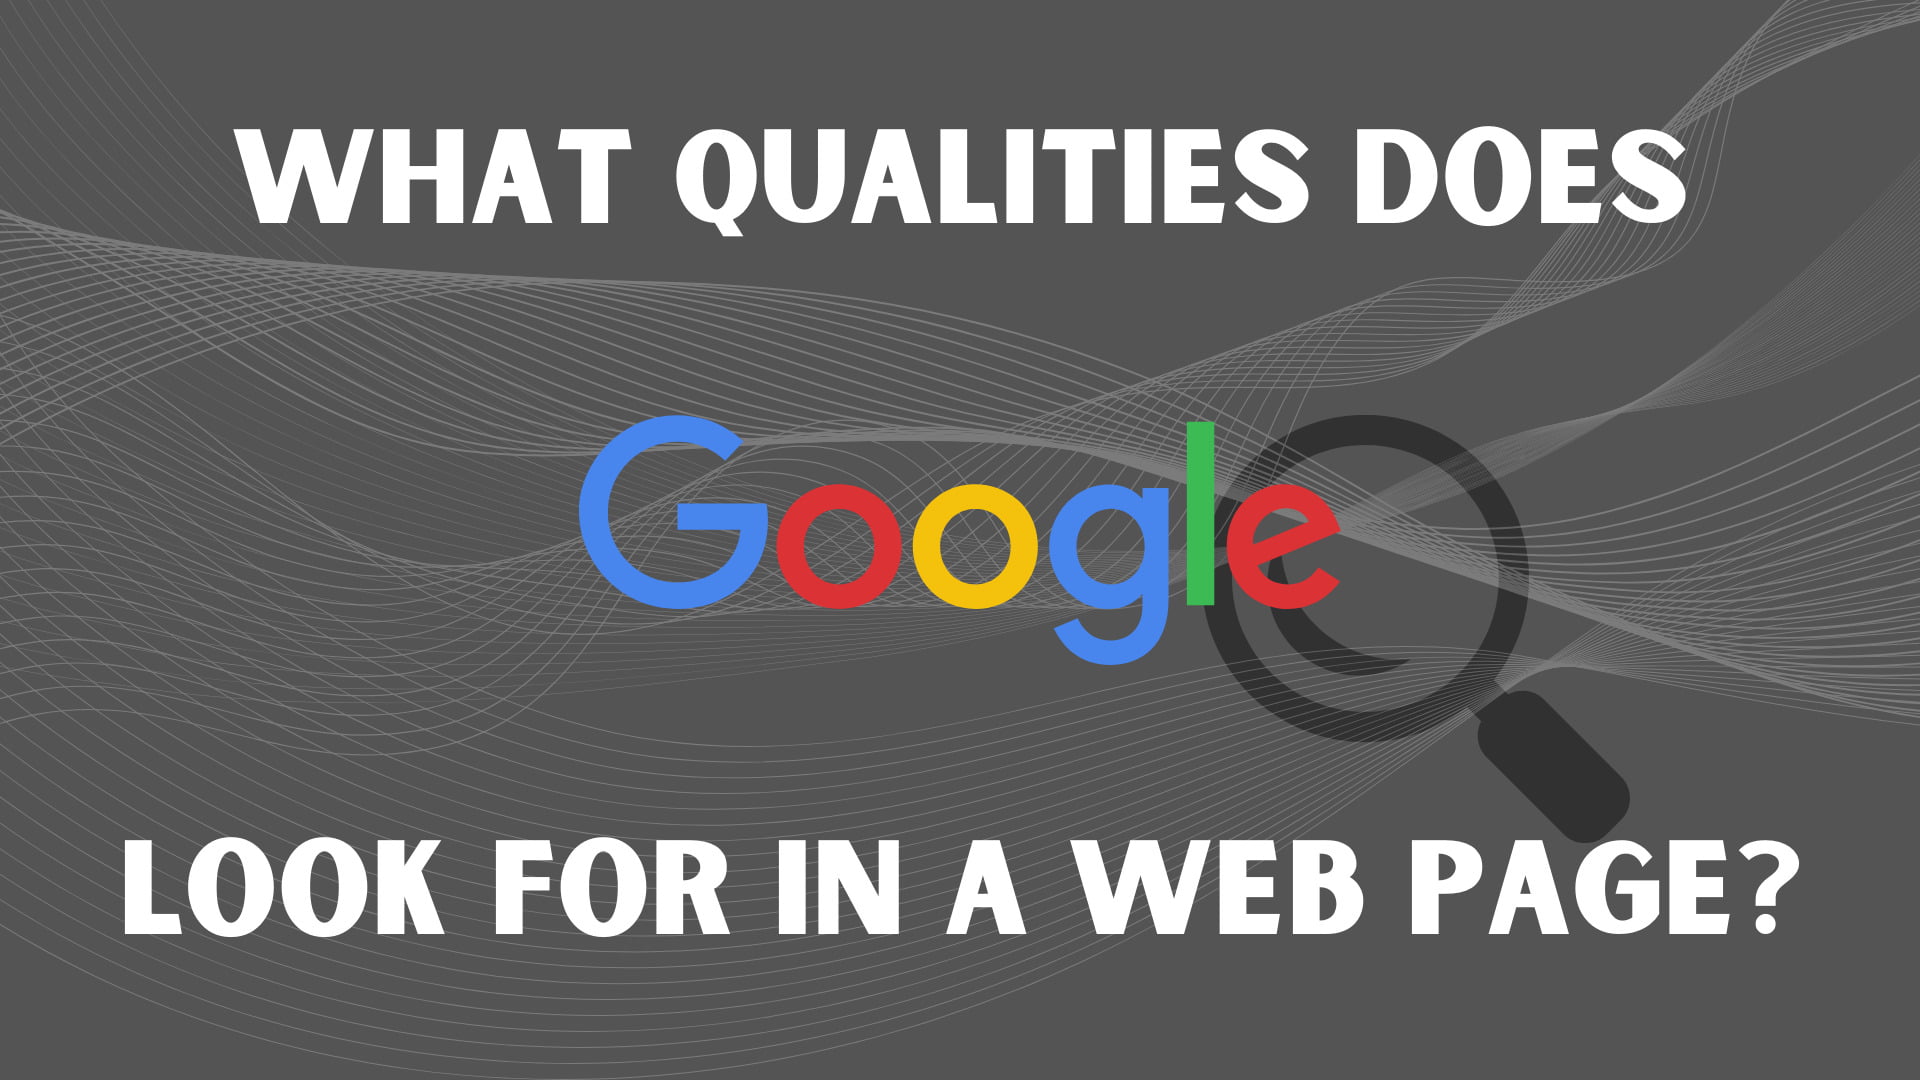 What qualities does Google look for in a web page?